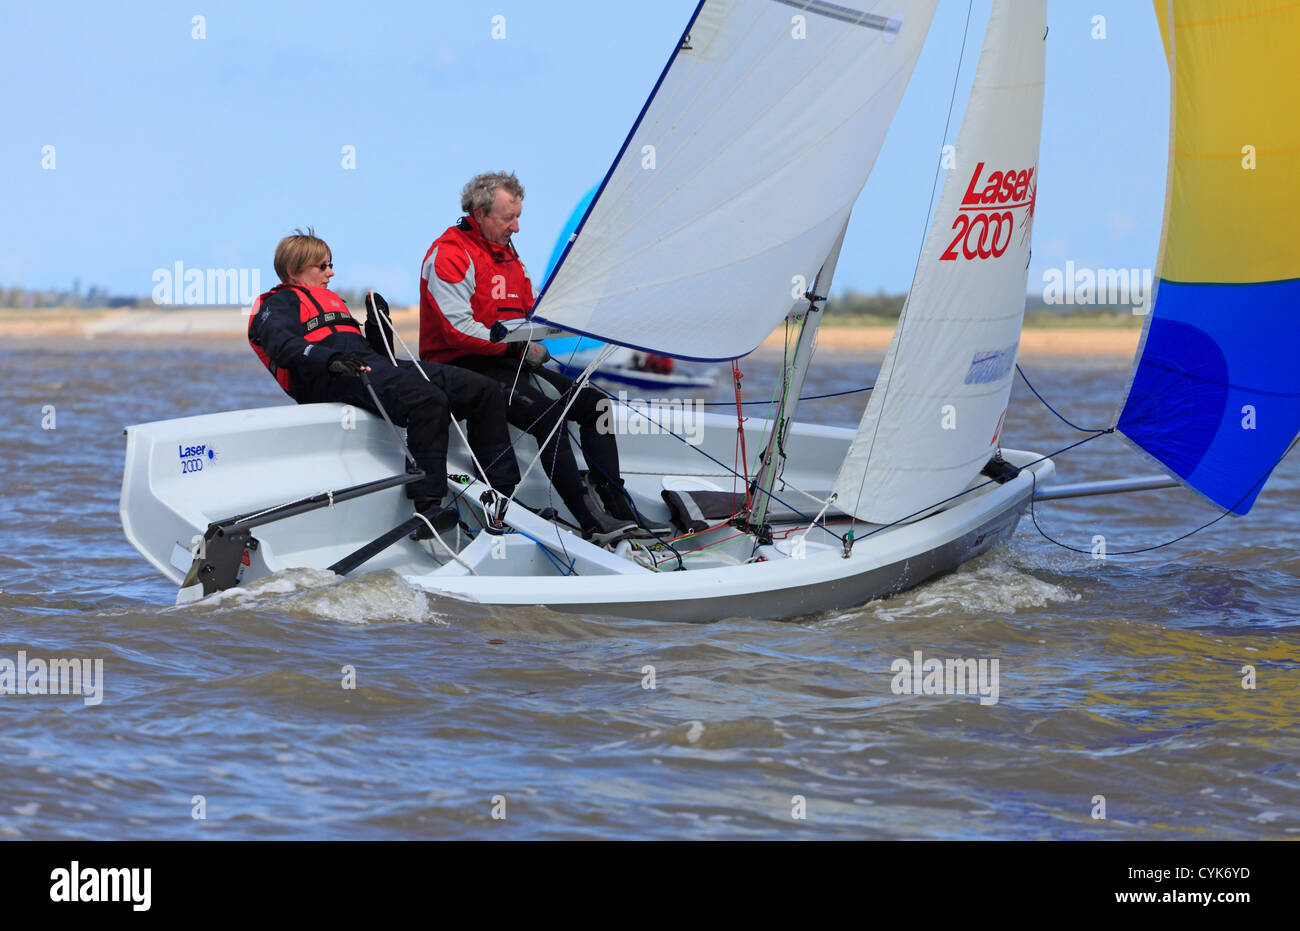 Middle age couple sailing in Laser 2000 class meet at Snettisham in Norfolk. Stock Photo